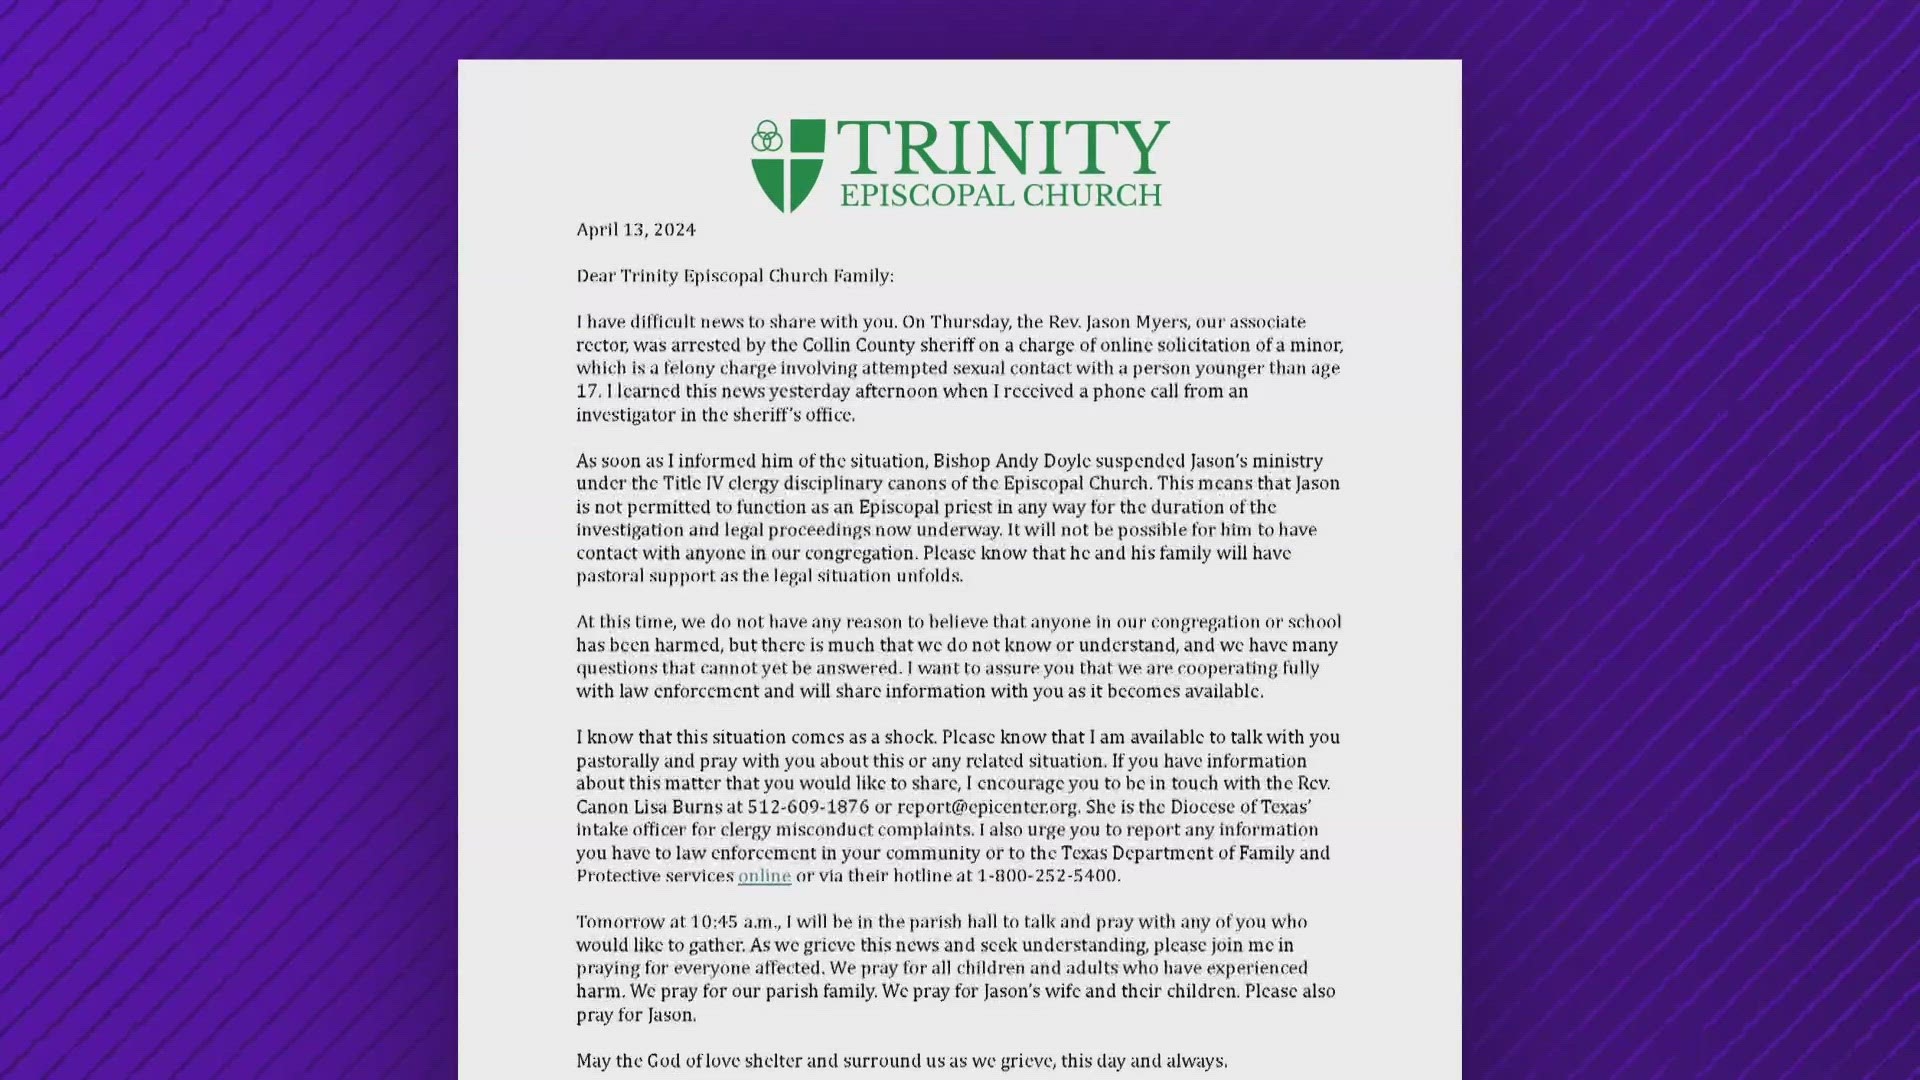 Rev. Jason Myers is not allowed to work as an Episcopal priest during the investigation, according to the Trinity Episcopal Church.